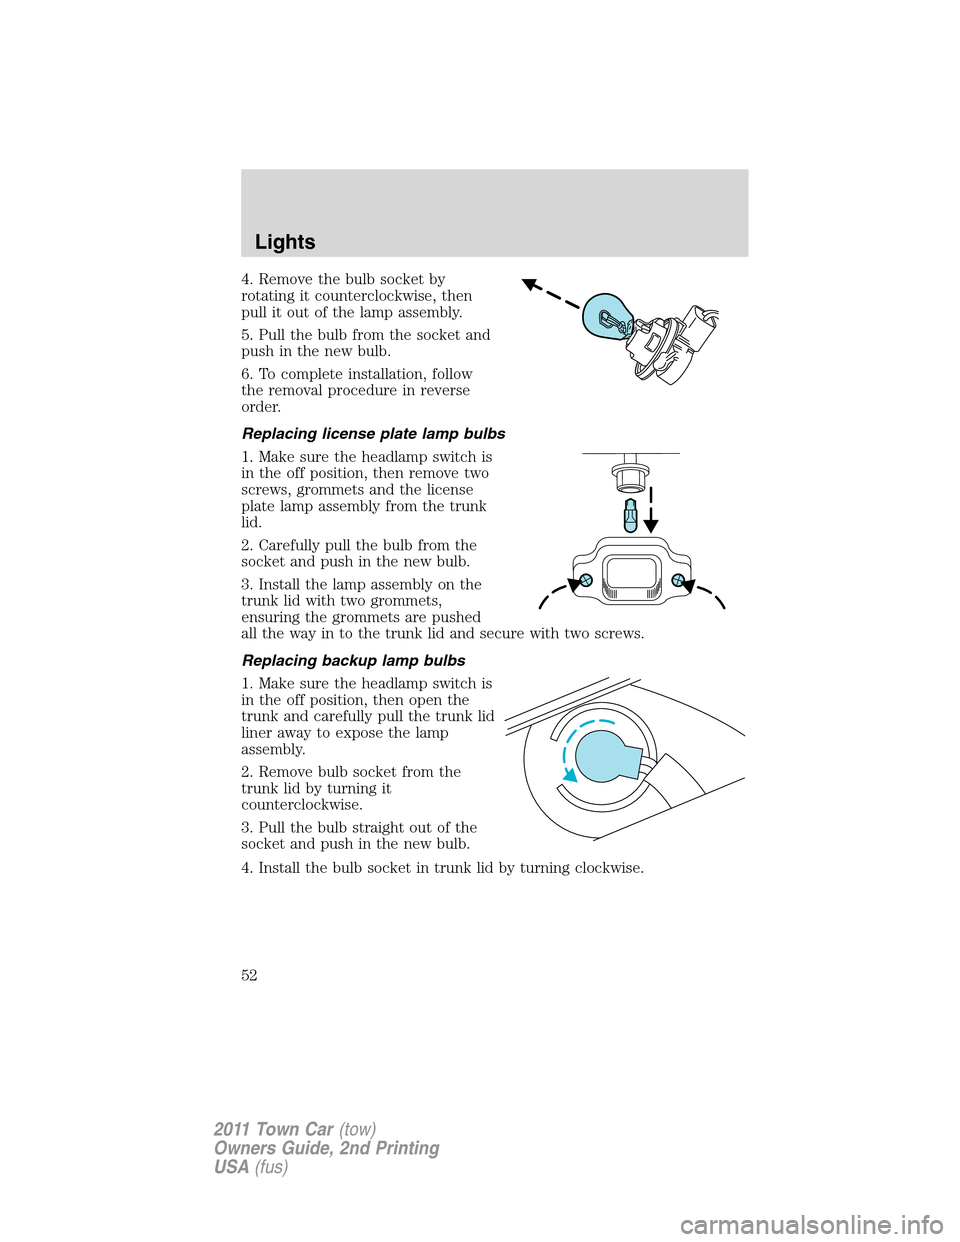 LINCOLN TOWN CAR 2011  Owners Manual 4. Remove the bulb socket by
rotating it counterclockwise, then
pull it out of the lamp assembly.
5. Pull the bulb from the socket and
push in the new bulb.
6. To complete installation, follow
the rem